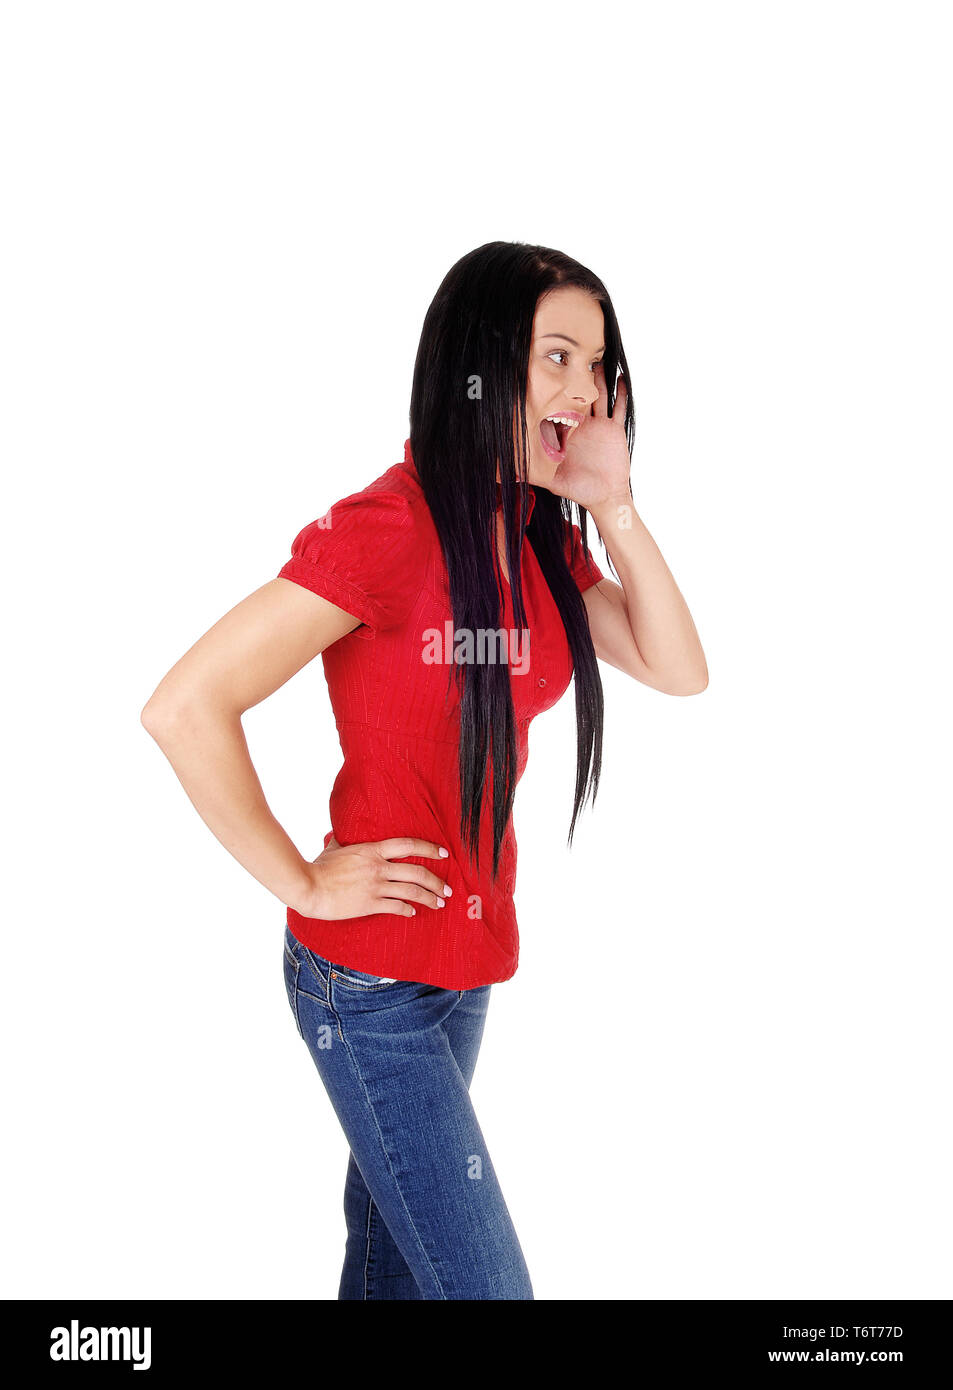 Woman in red blouse and black hair screaming Stock Photo